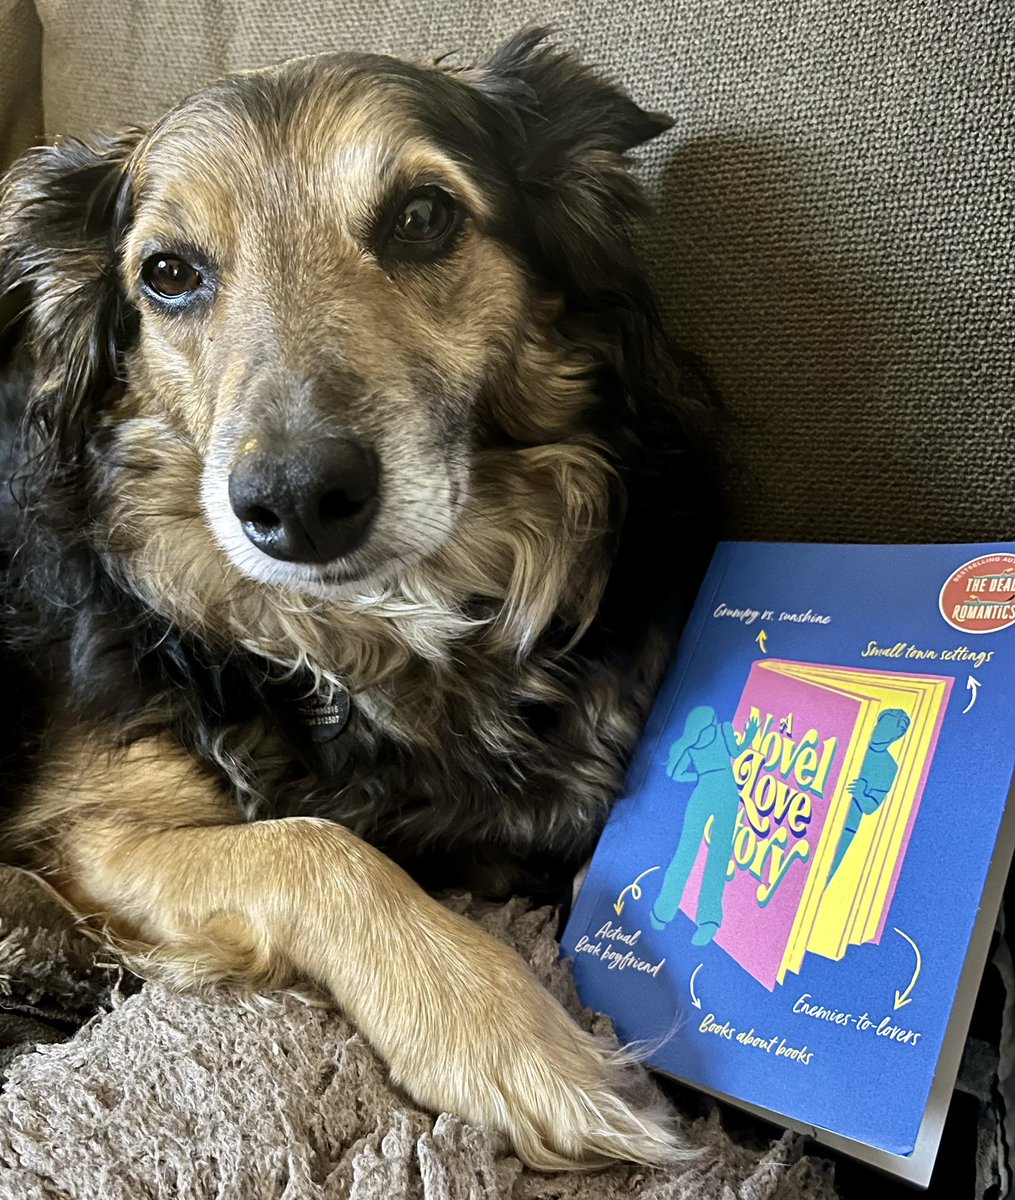 So thrilled to get a proof of the new @ashposton #ANovelLoveStory (even if Lily appears to called first dibs!) 

I adore Ashley’s books and I can’t wait to start this one 💙📚💙

Thank you so much for sending @priyalagrawal